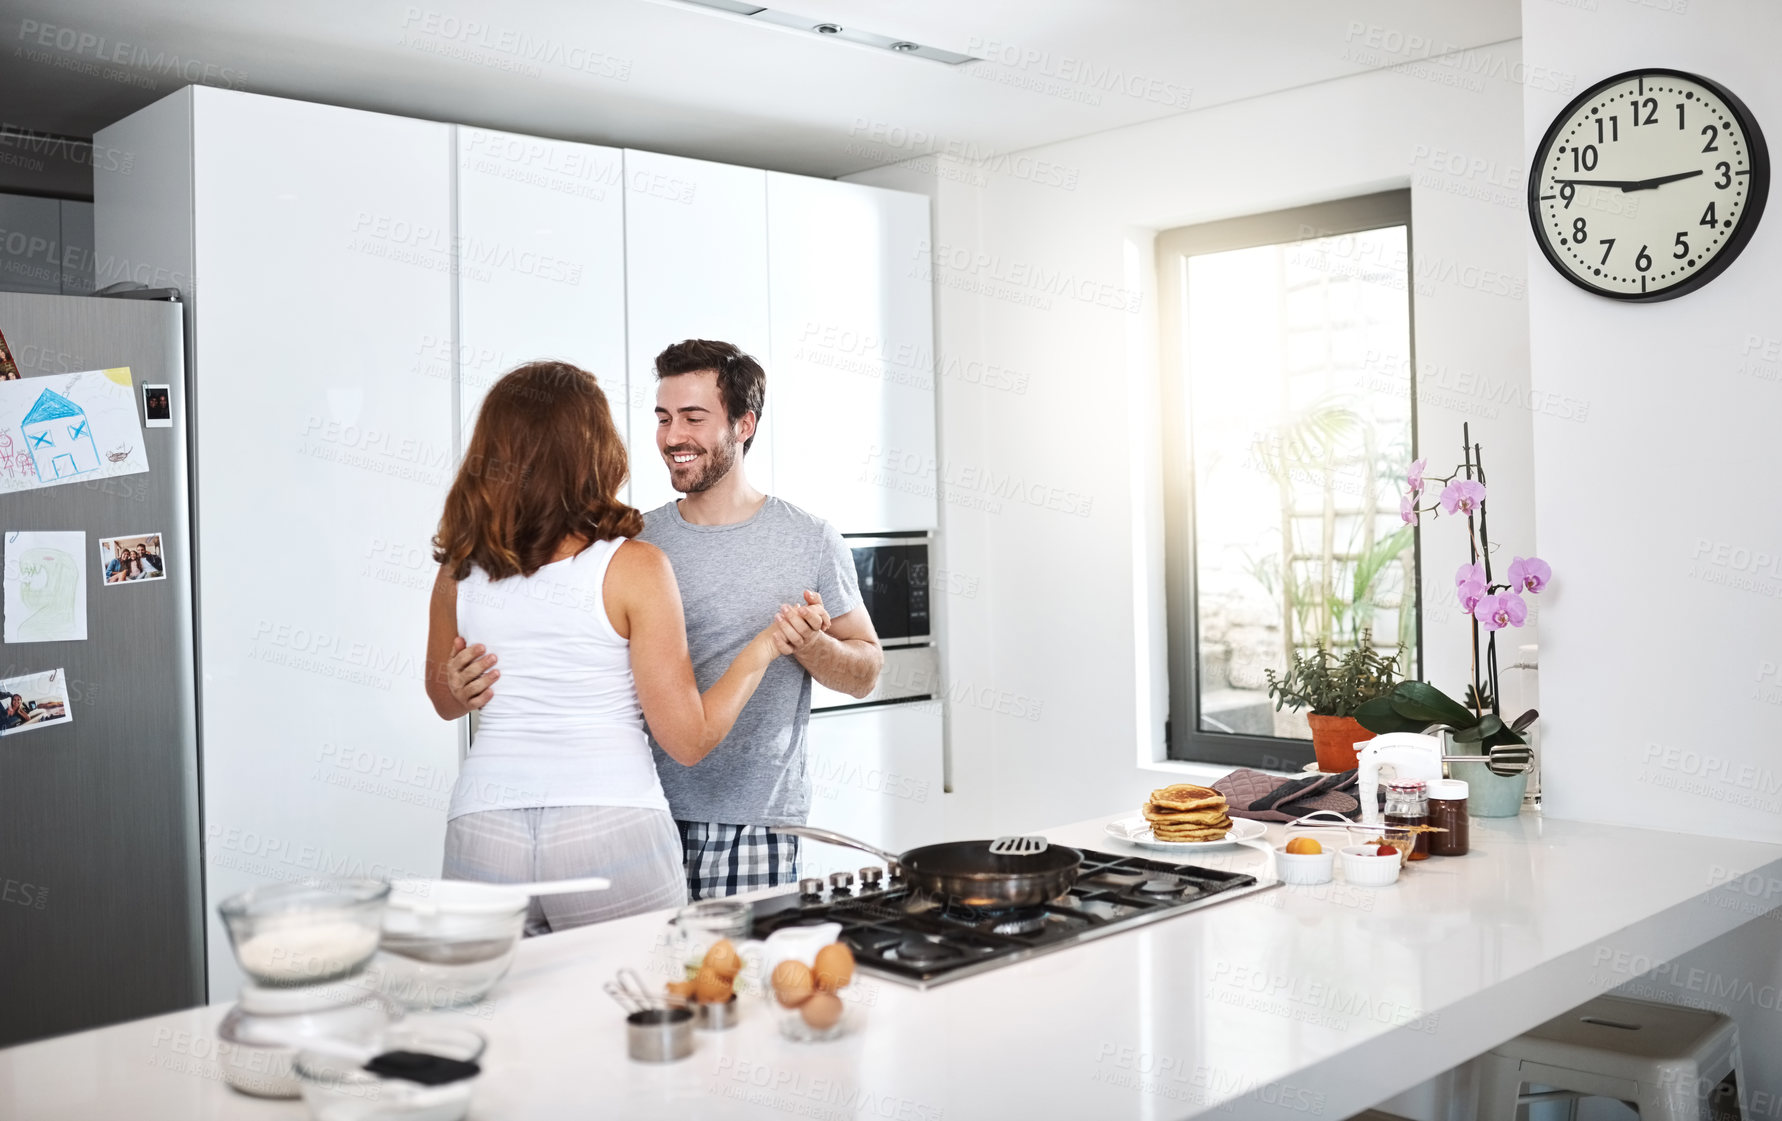 Buy stock photo Shot of young couple dancing in the kitchen while preparing breakfast